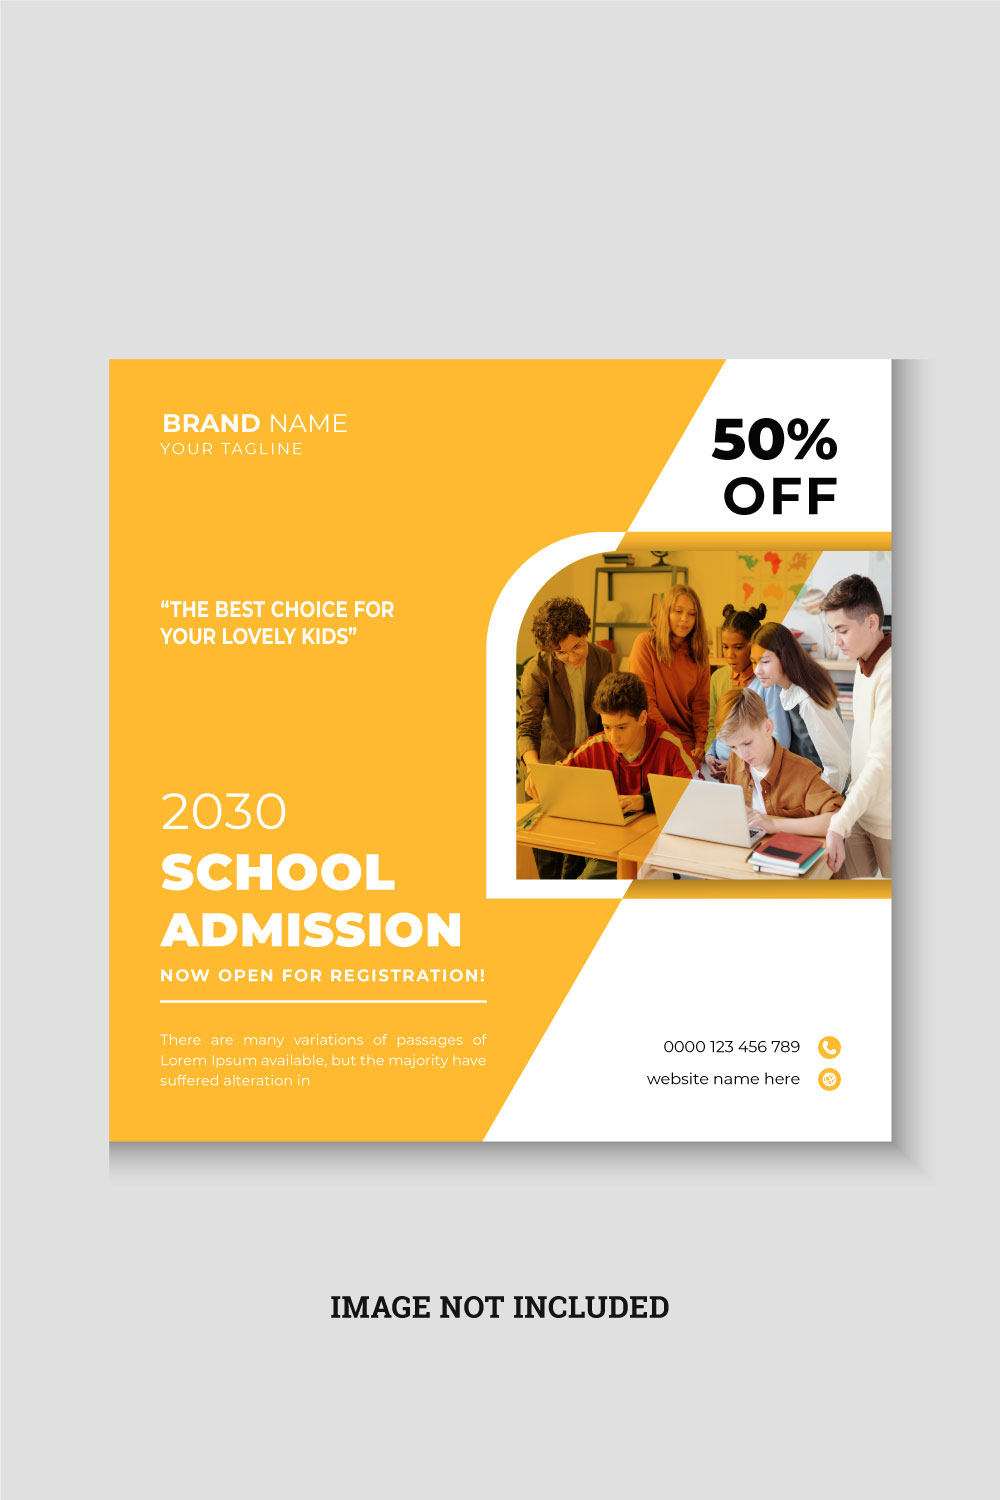 School admission square banner or social media post design template pinterest preview image.